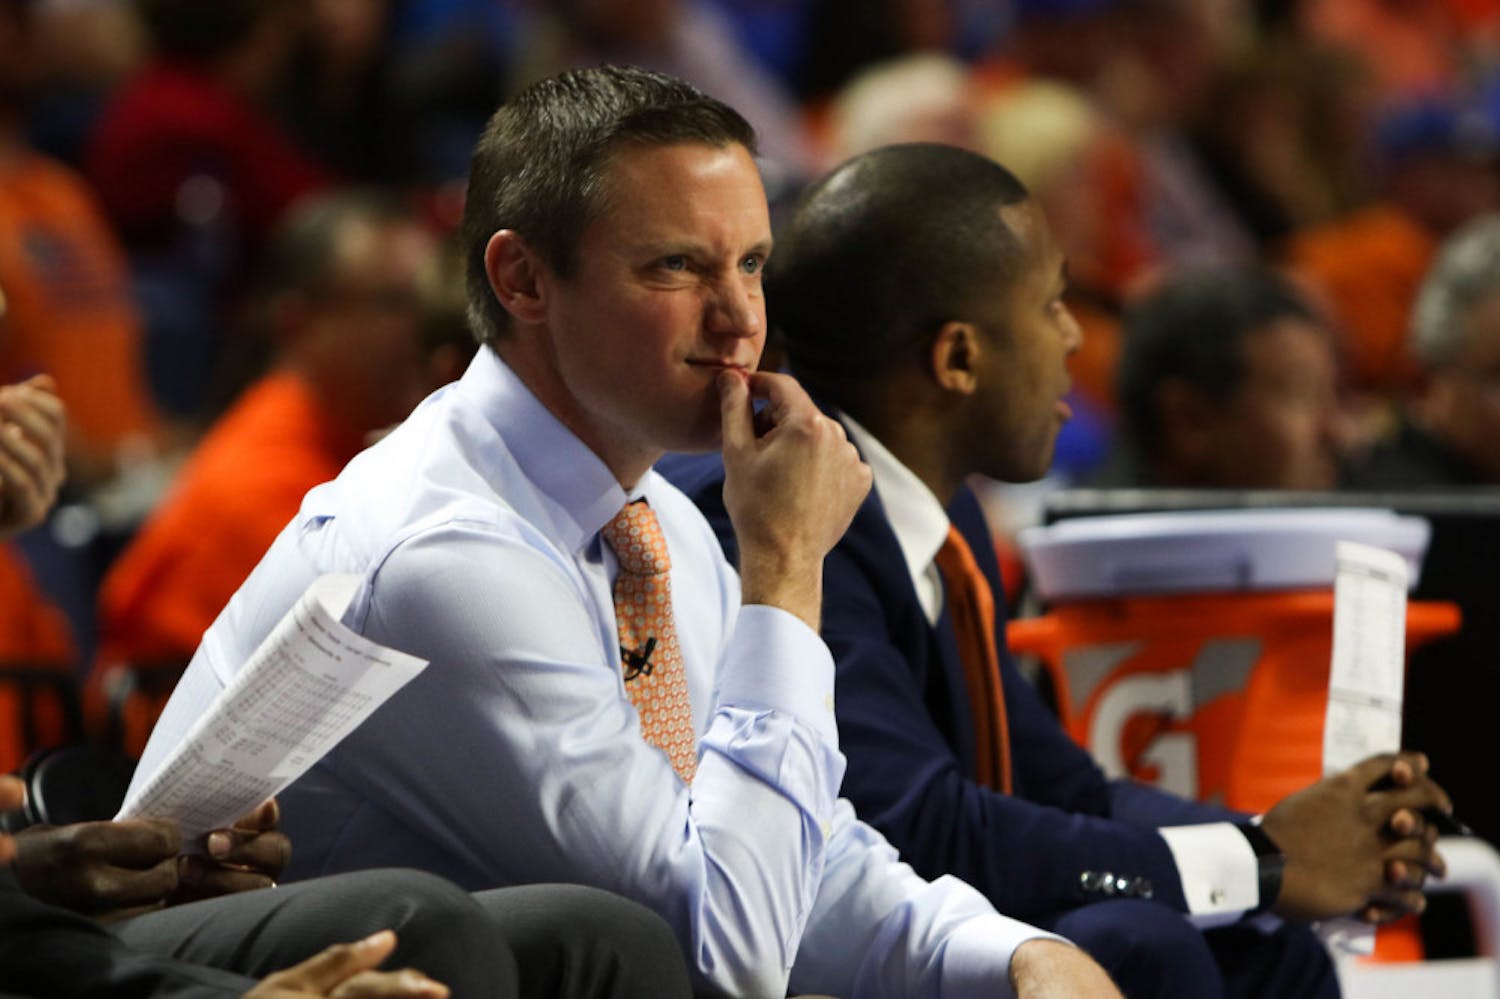 Men’s basketball coach Mike White and the Gators are in the middle of one of the worst offensive seasons in the past 20 years. They are averaging 68.7 points a game, the second lowest in that span.
&nbsp;